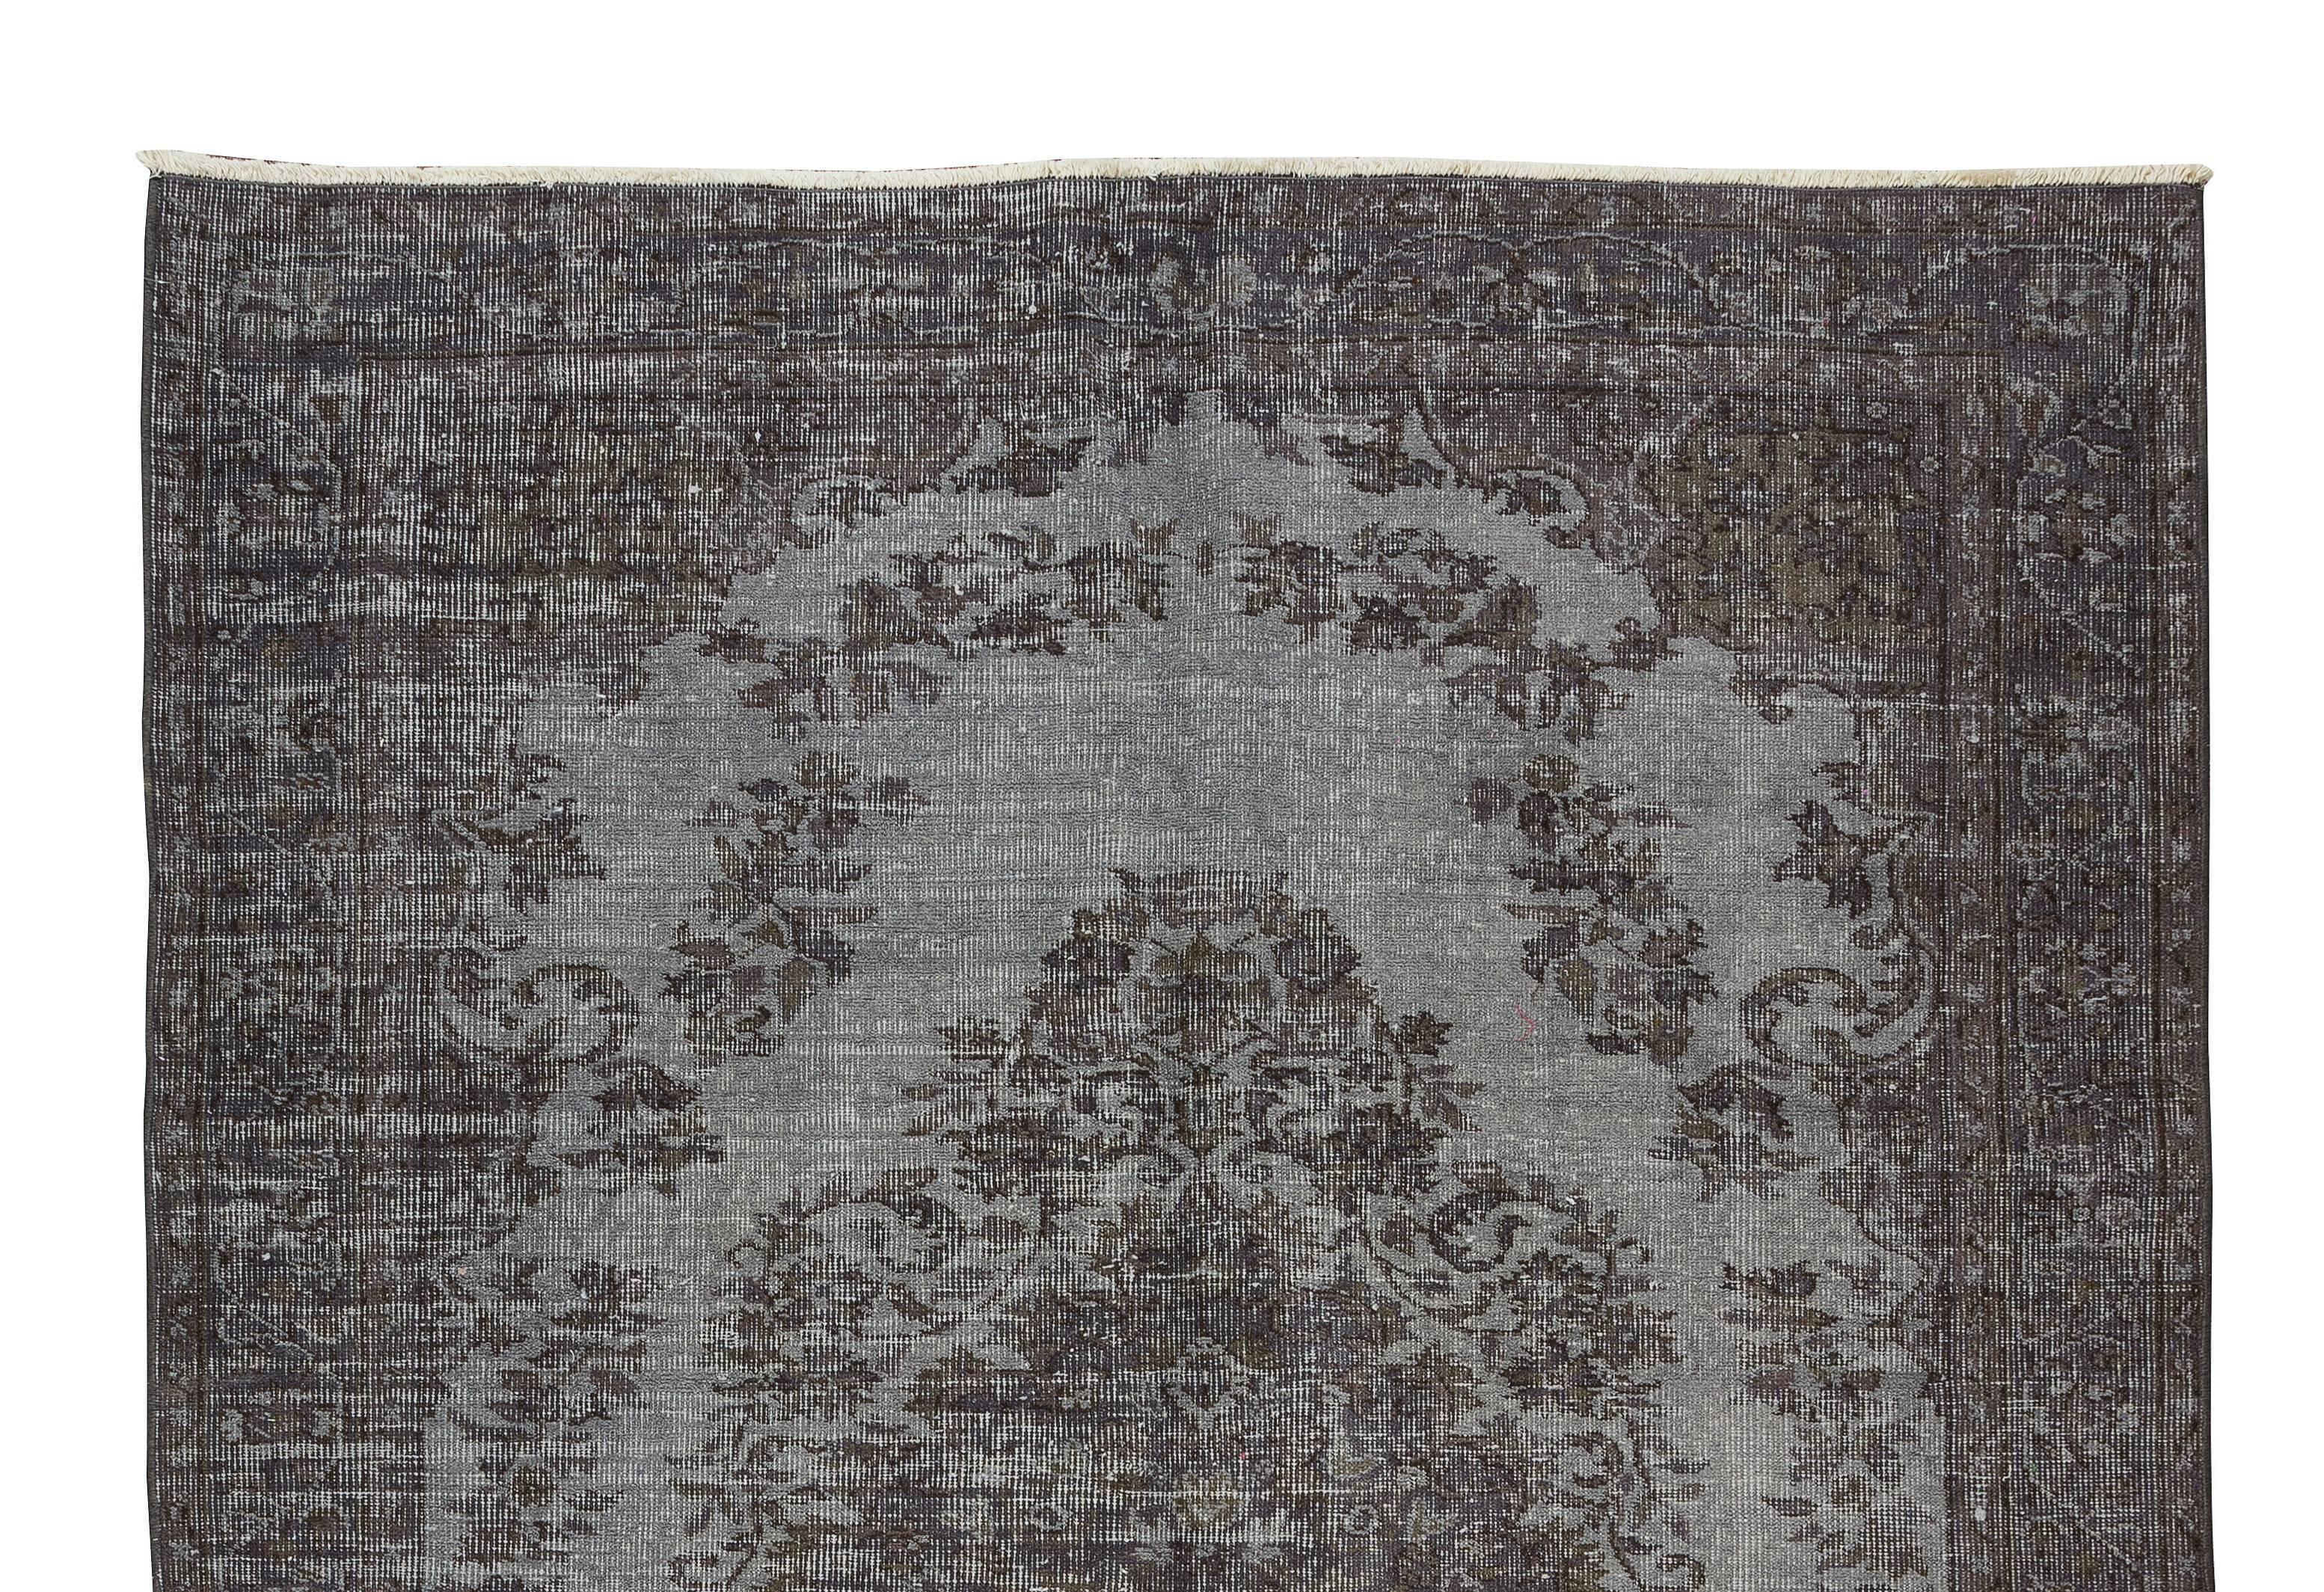 Turkish 5.5x7.6 Ft Vintage Medallion Design Area Rug in Gray, Hand-Knotted in Turkey For Sale